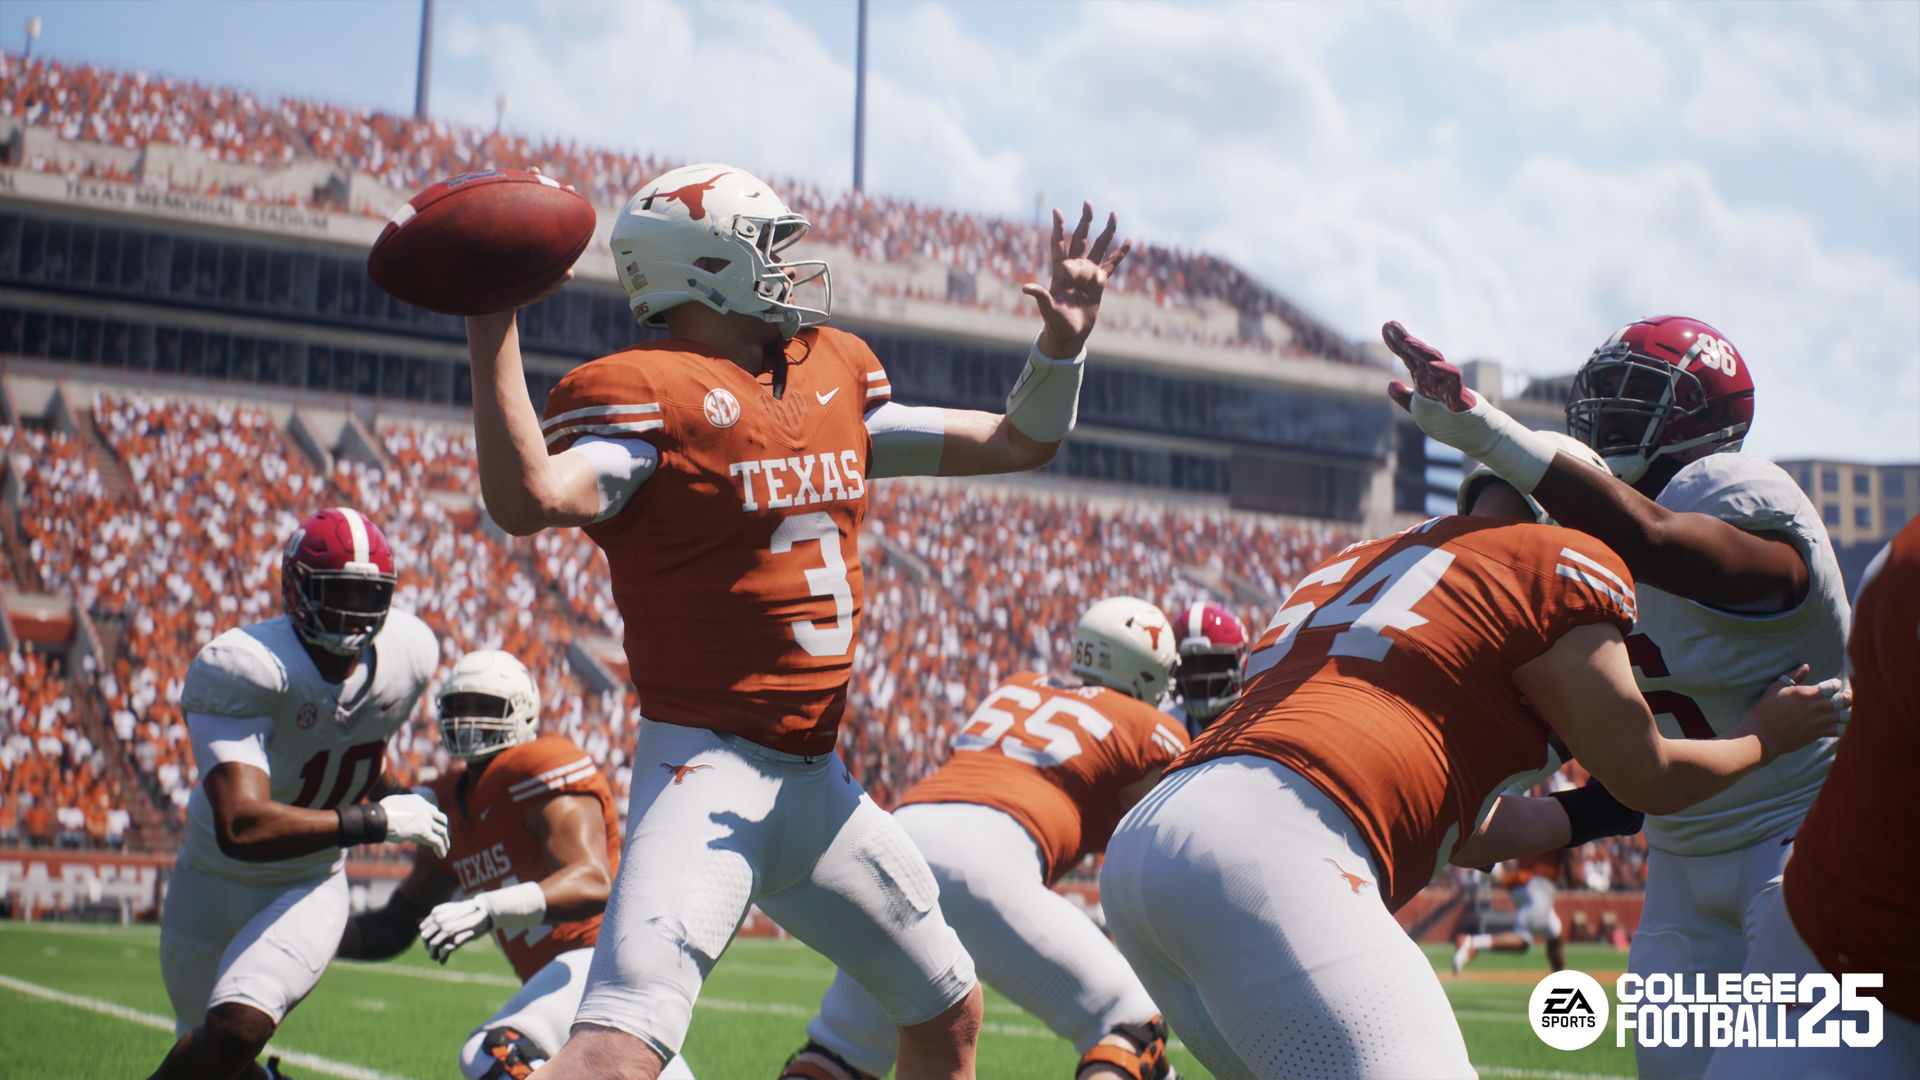 Texas quarterback Quinn Ewers draws back to pass in a game against Alabama at Joe Jamail Field at Darryl K Royal Stadium in Austin Texas in EA Sports College Football 25